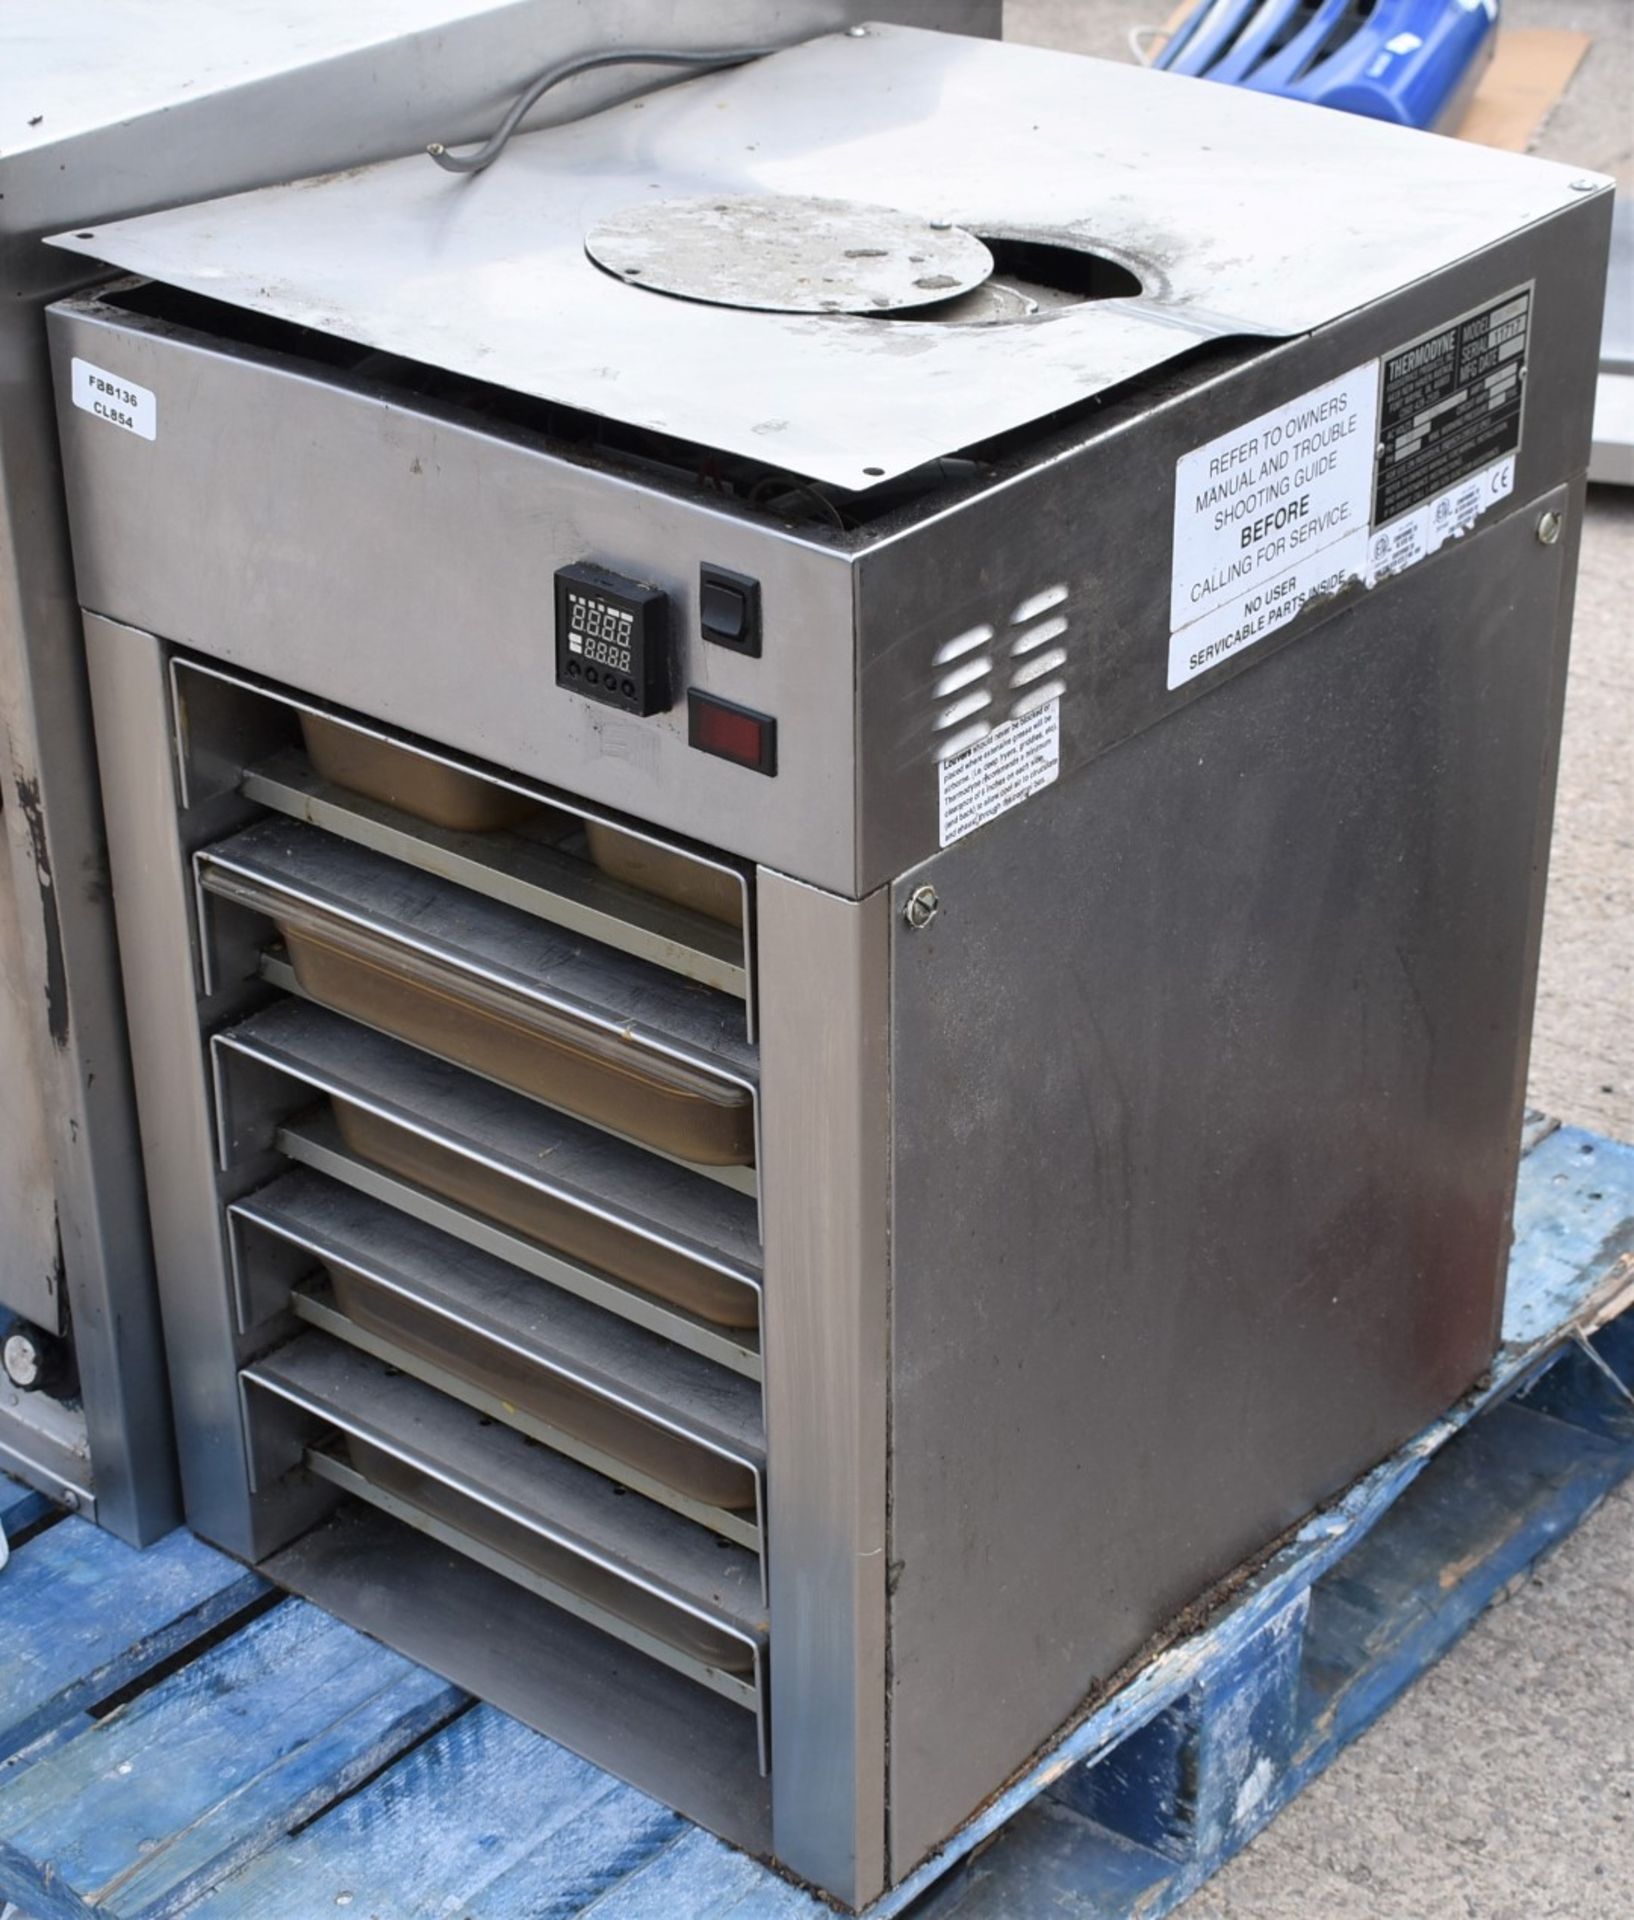 1 x Thermodyne Counter-Top Slow Cook and Hold Oven - 230v - Dimensions: H66 x W44 x D56 cms - Image 4 of 7